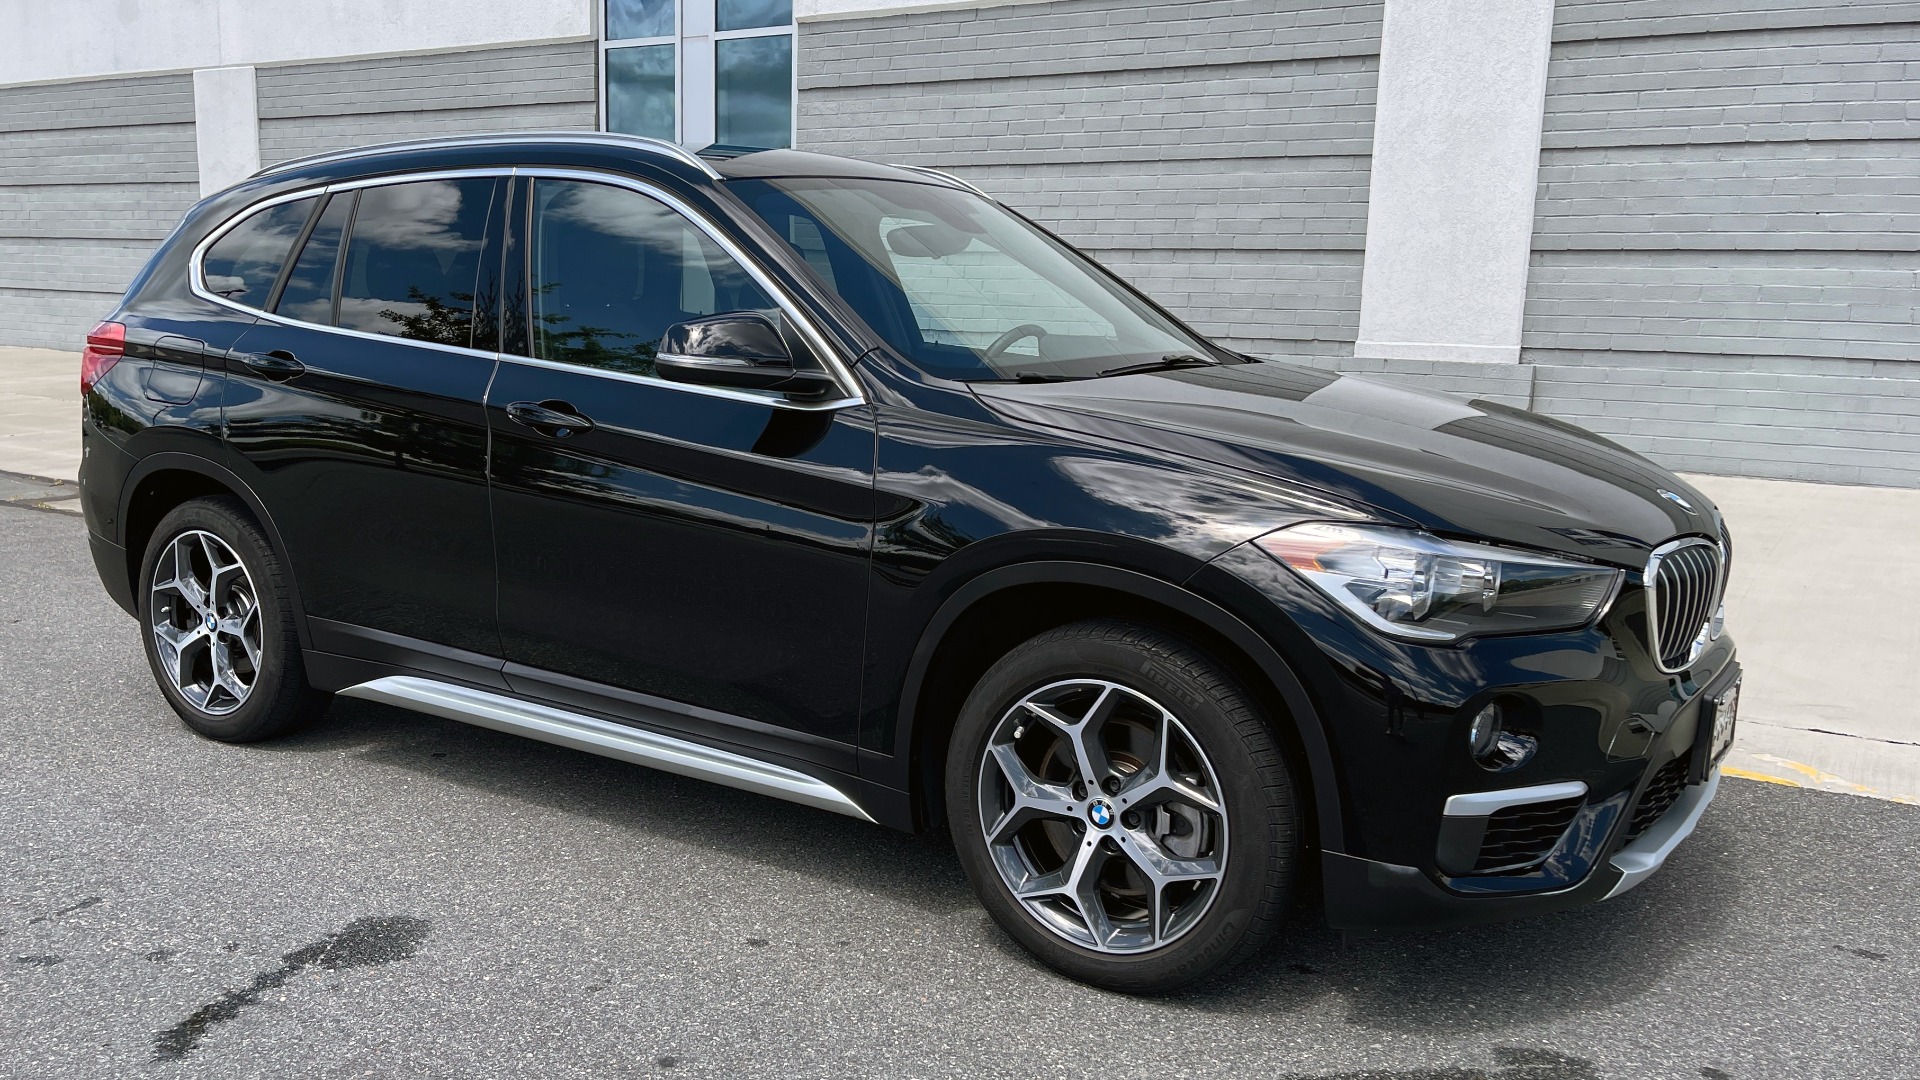 Used 2018 BMW X1 XDRIVE28I / 2.0L / AWD / 8-SPD AUTO / REARVIEW for sale Sold at Formula Imports in Charlotte NC 28227 6